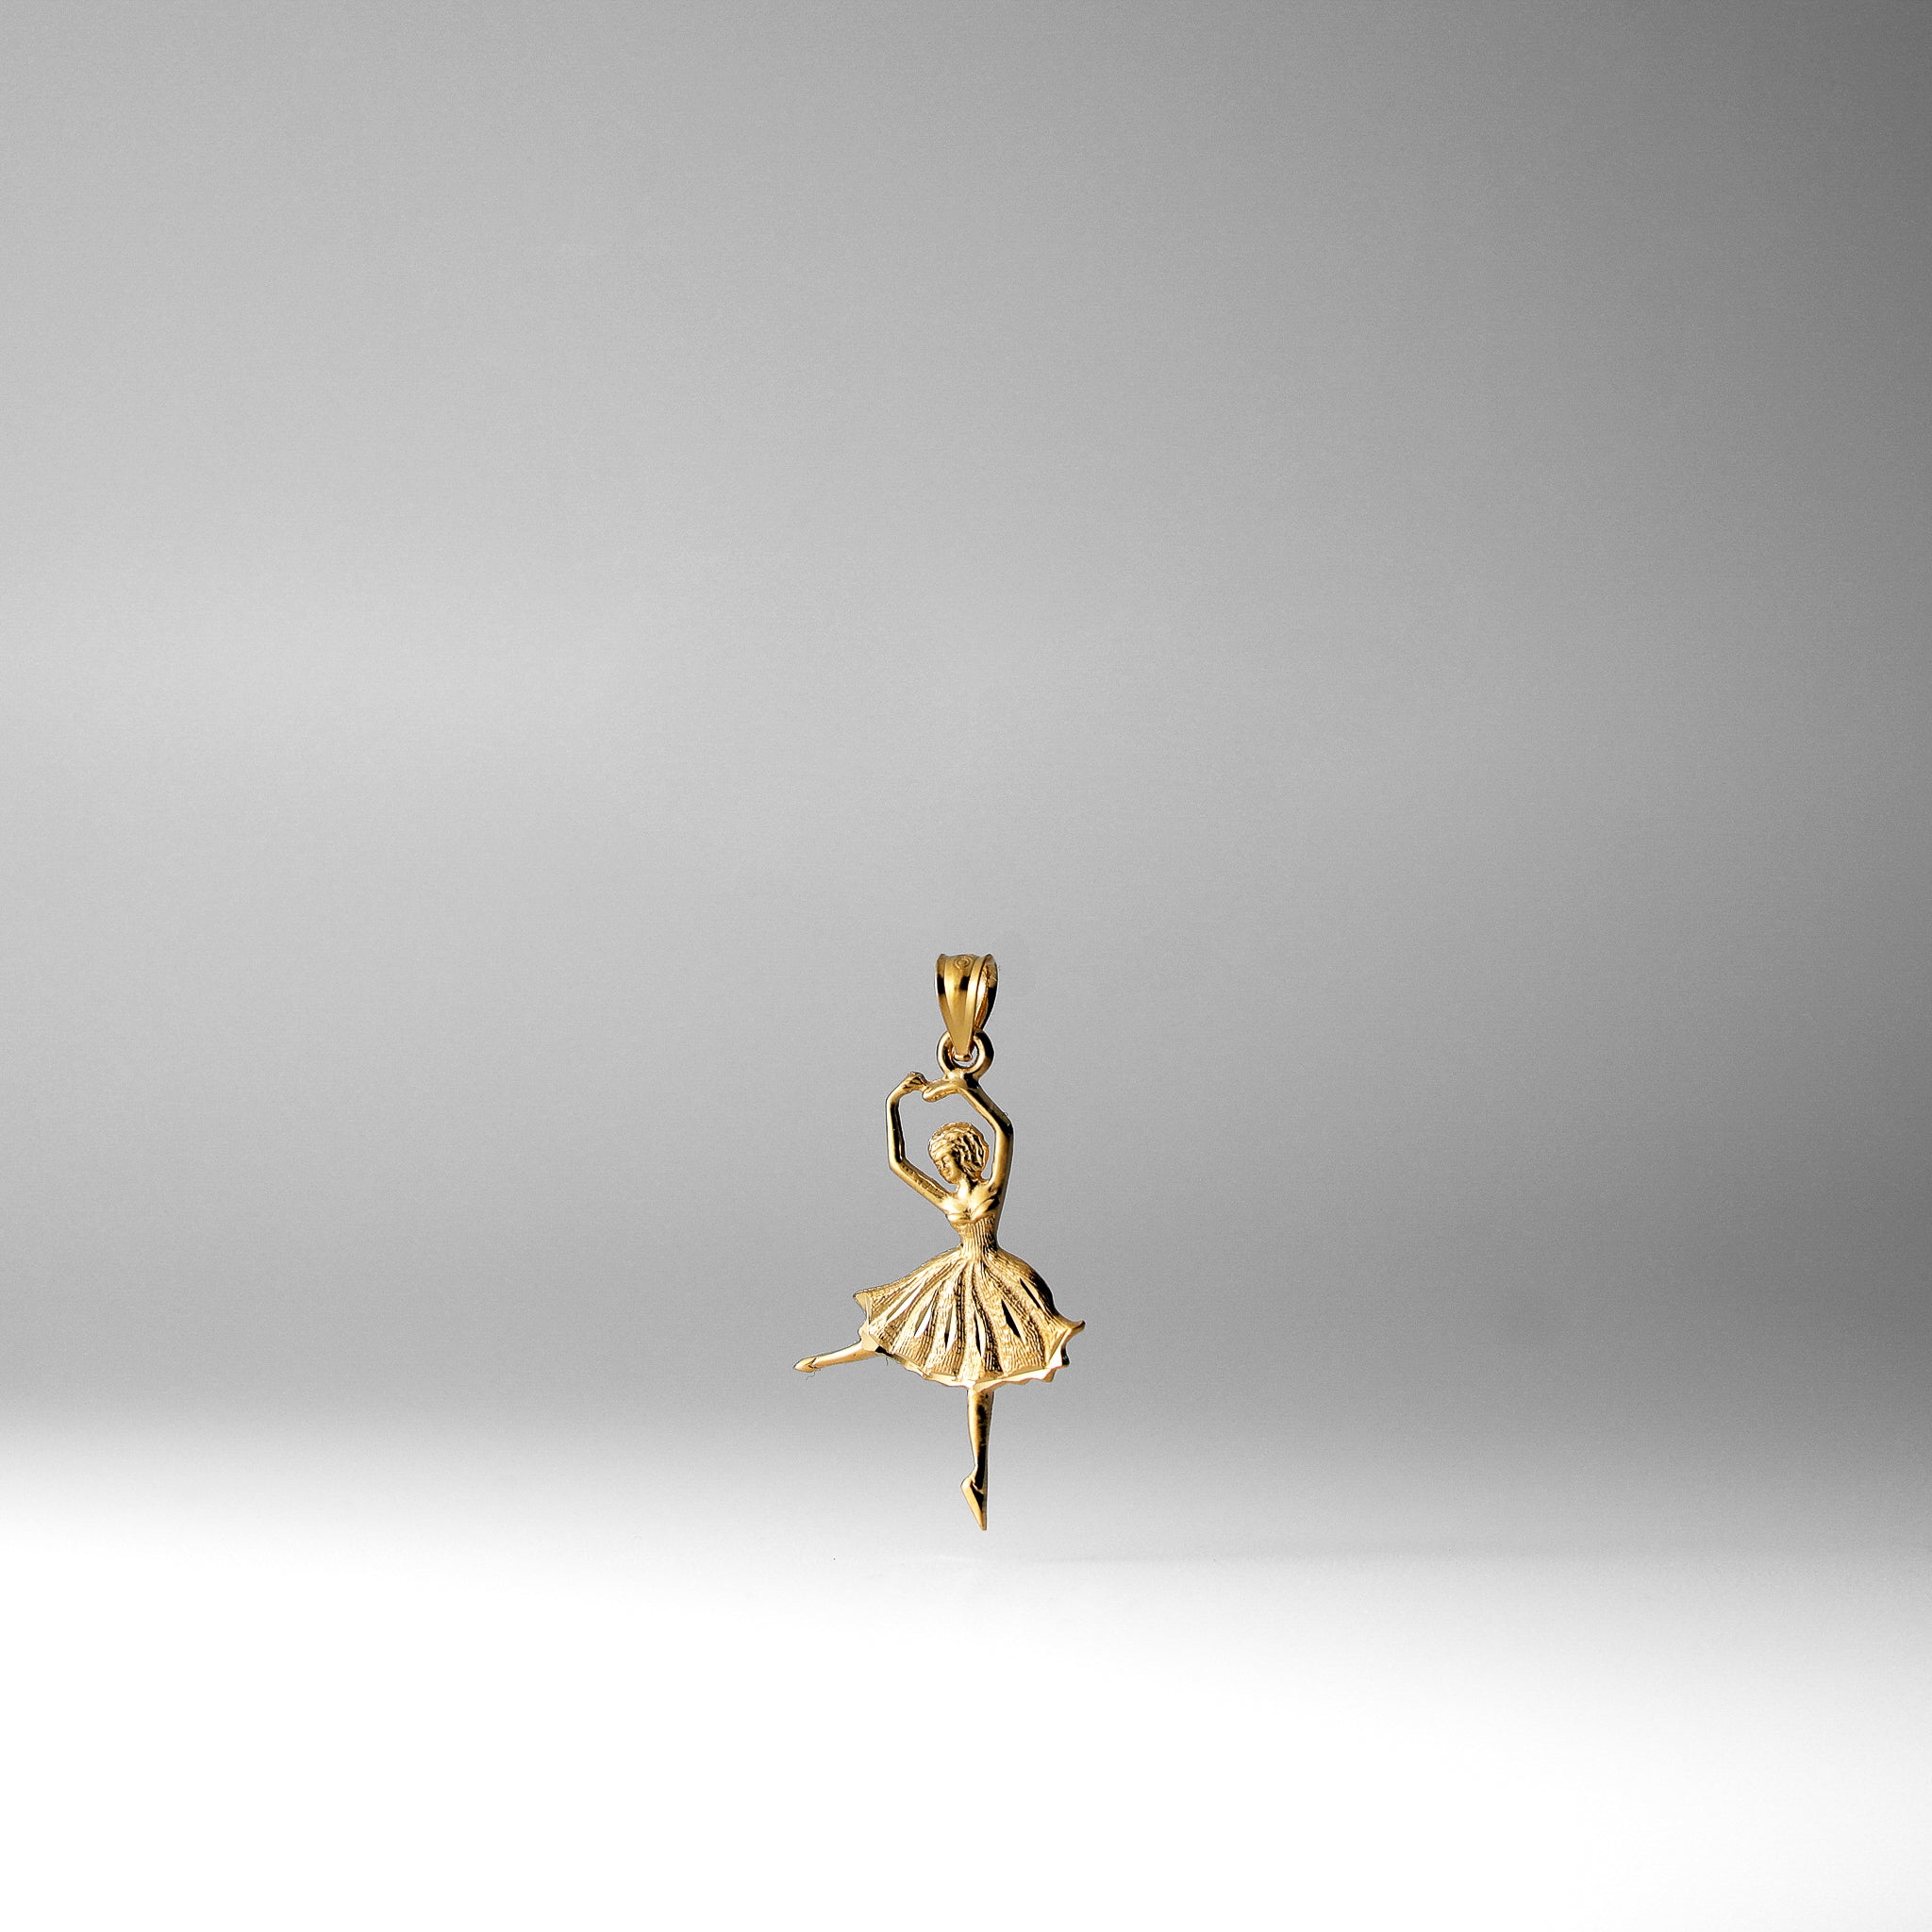 Gold Dancing Ballerina Necklace Pendant - Charlie & Co. Jewelry